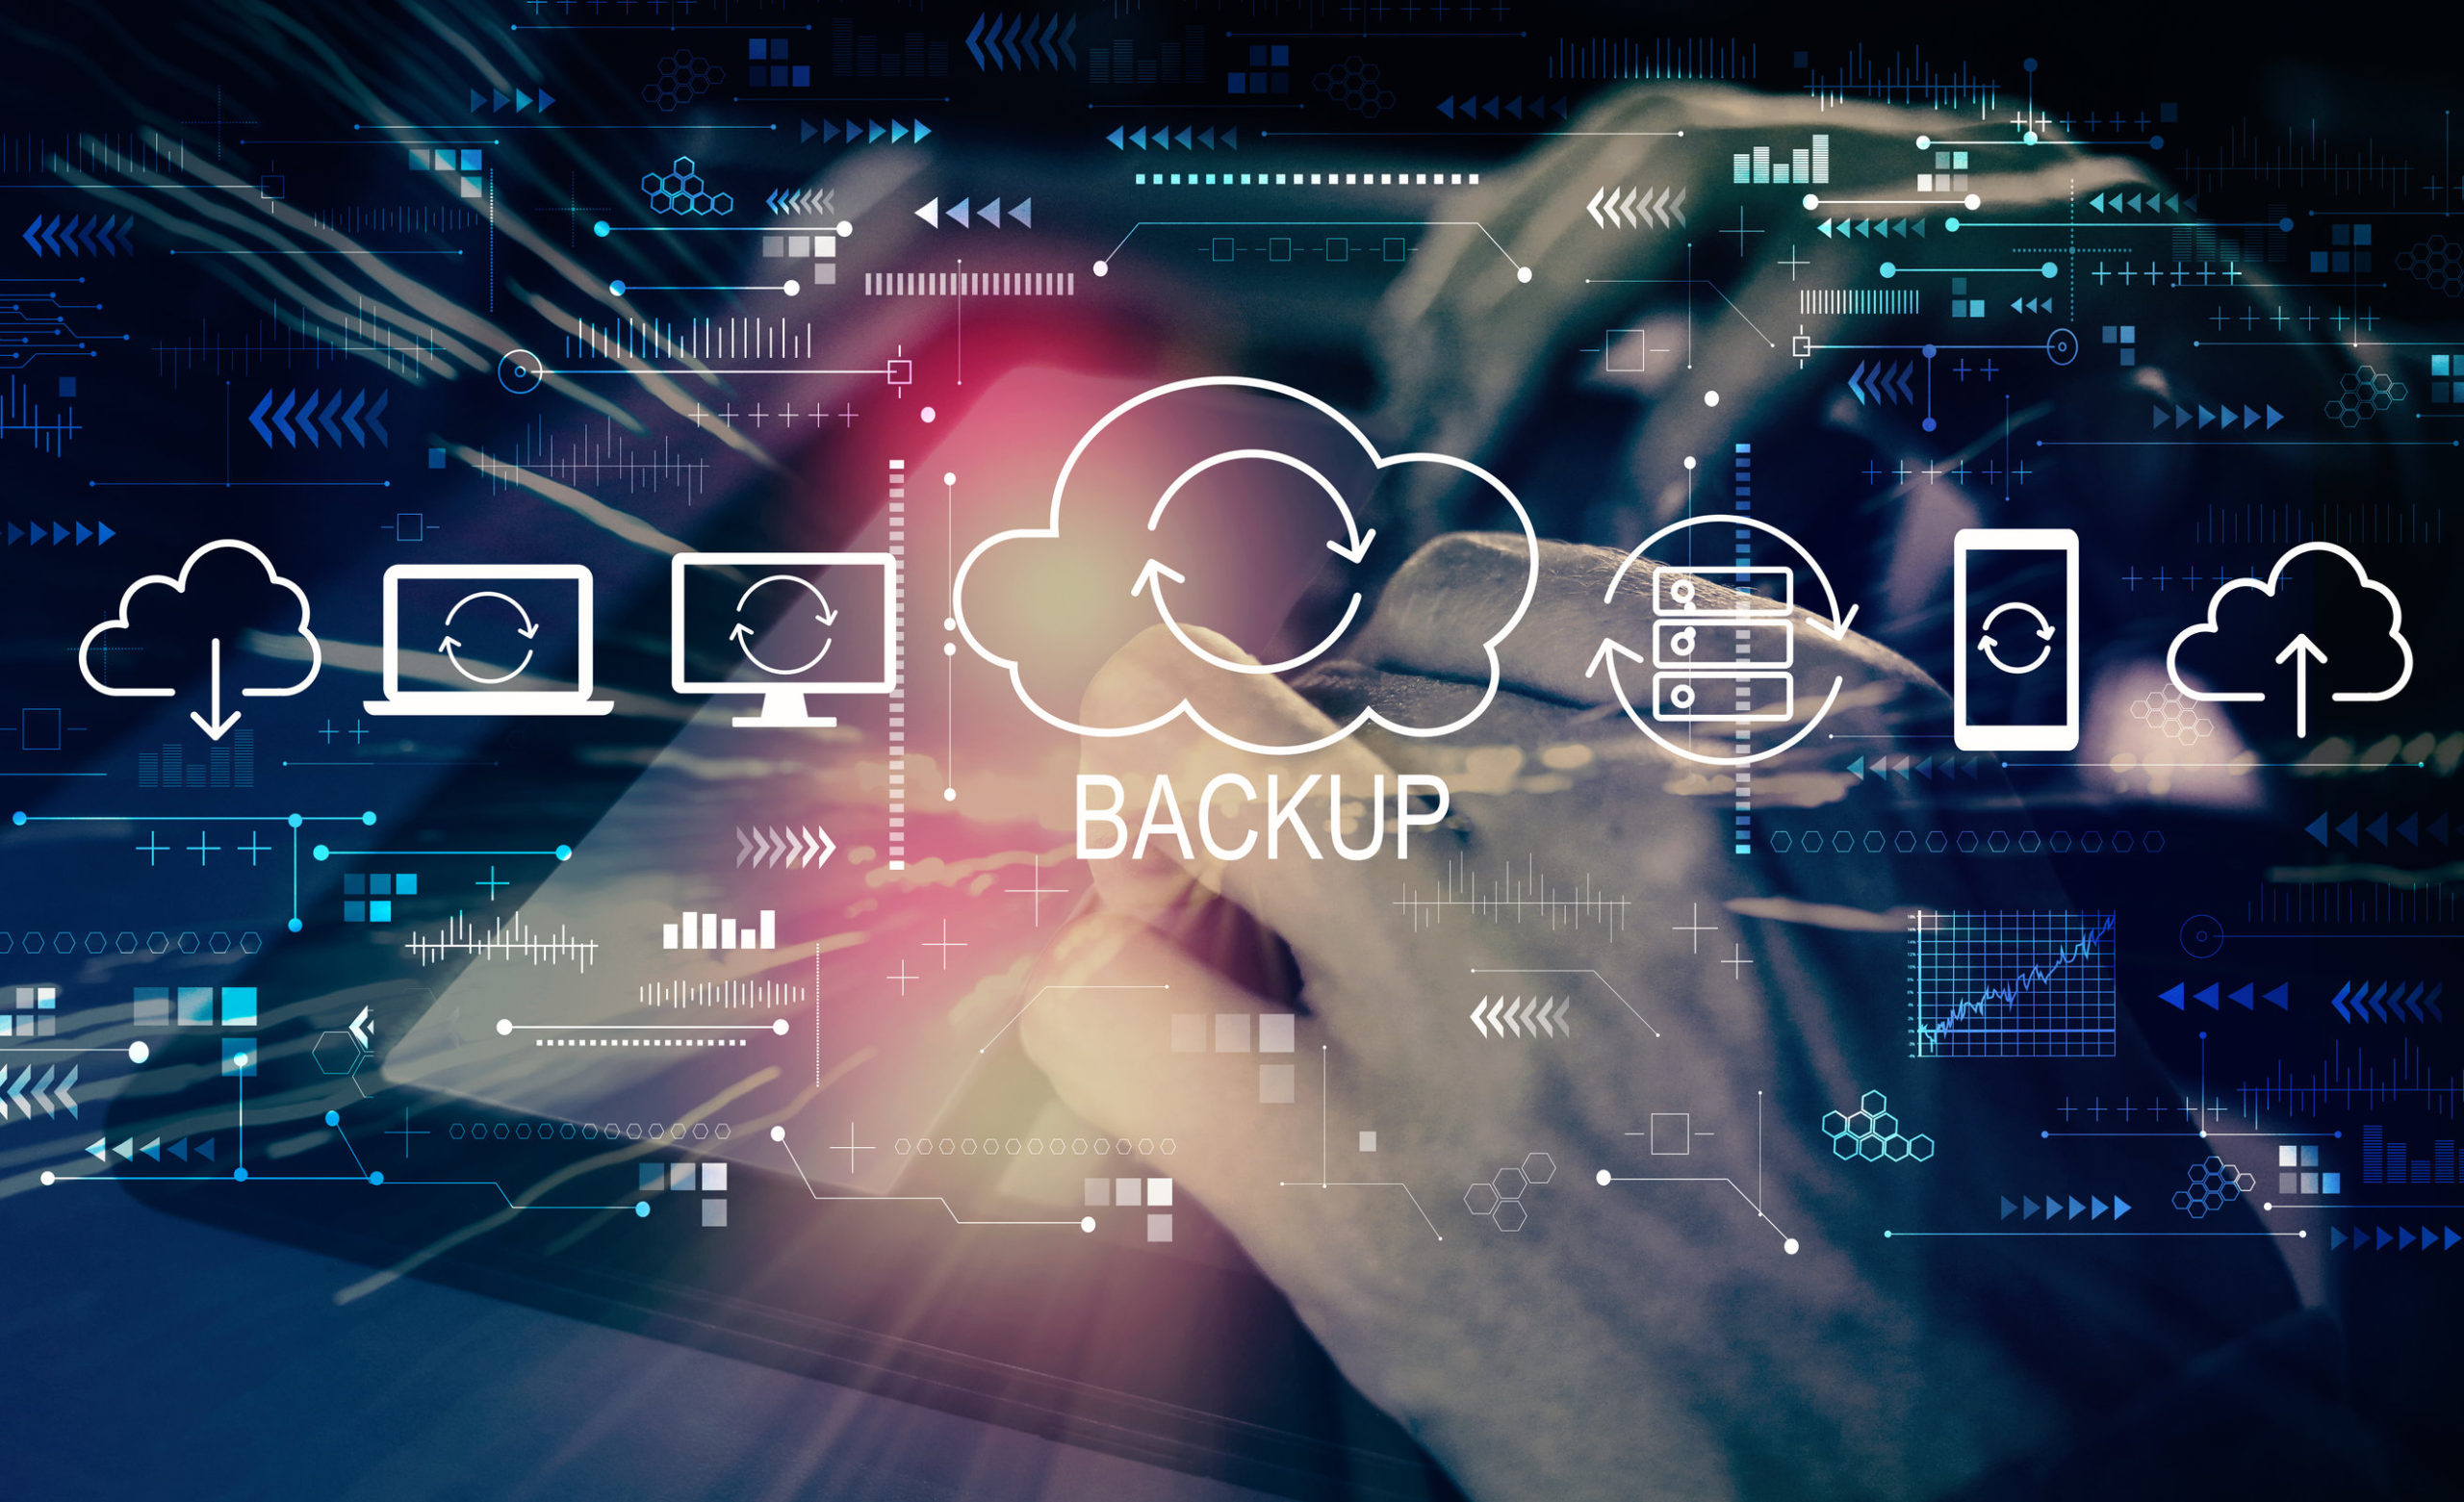 May 2021 Newsletter – Cloud-to-Cloud Backup & Microsoft Outlook Outage